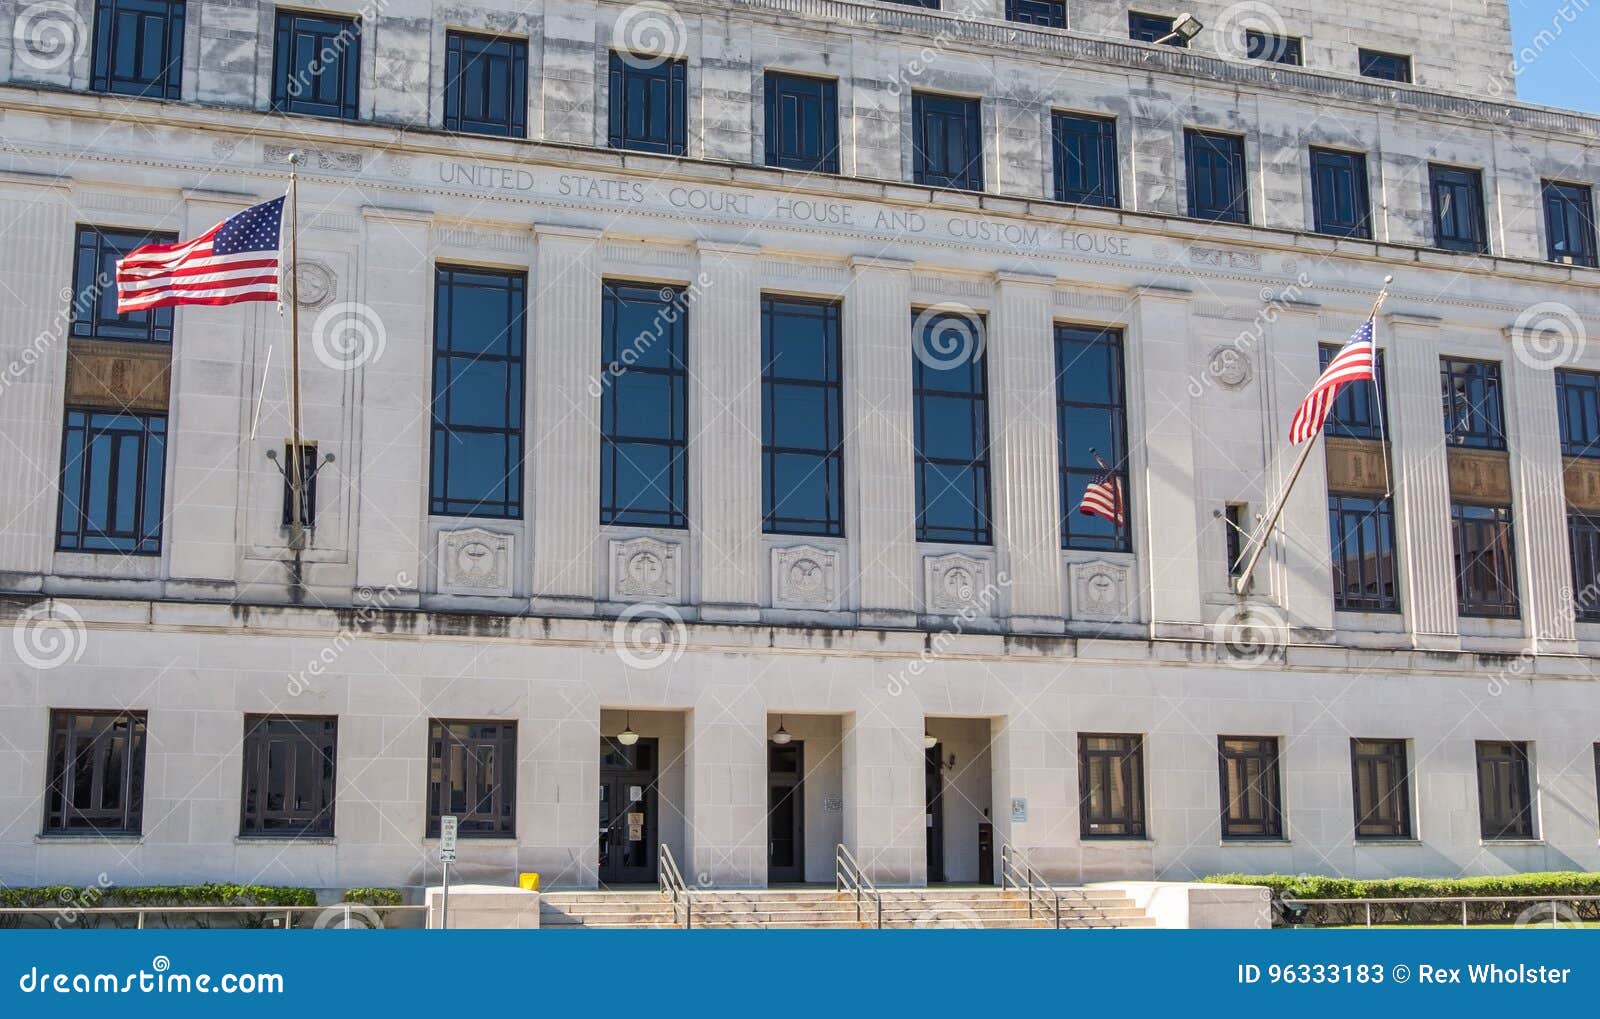 United States District Court in Mobile Alabama Stock Image - Image of